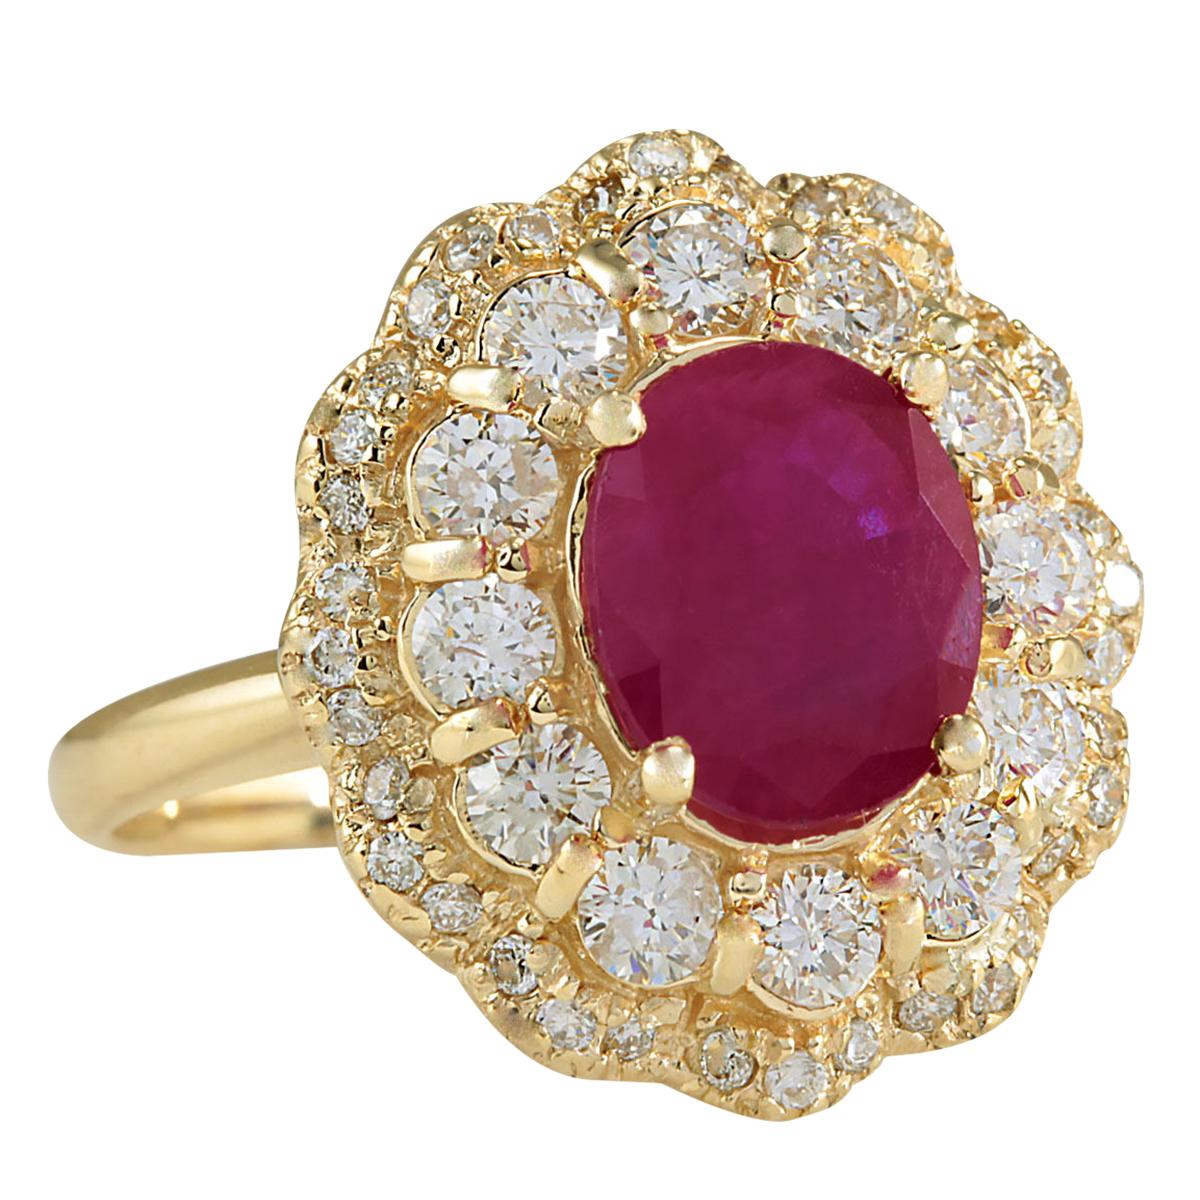 Stamped: 14K Yellow Gold
Total Ring Weight: 7.0 Grams
Total Natural Ruby Weight is 2.75 Carat (Measures: 9.00x7.00 mm)
Color: Red
Total Natural Diamond Weight is 1.30 Carat
Color: F-G, Clarity: VS2-SI1
Face Measures: 19.60x17.50 mm
Sku: [702134W]